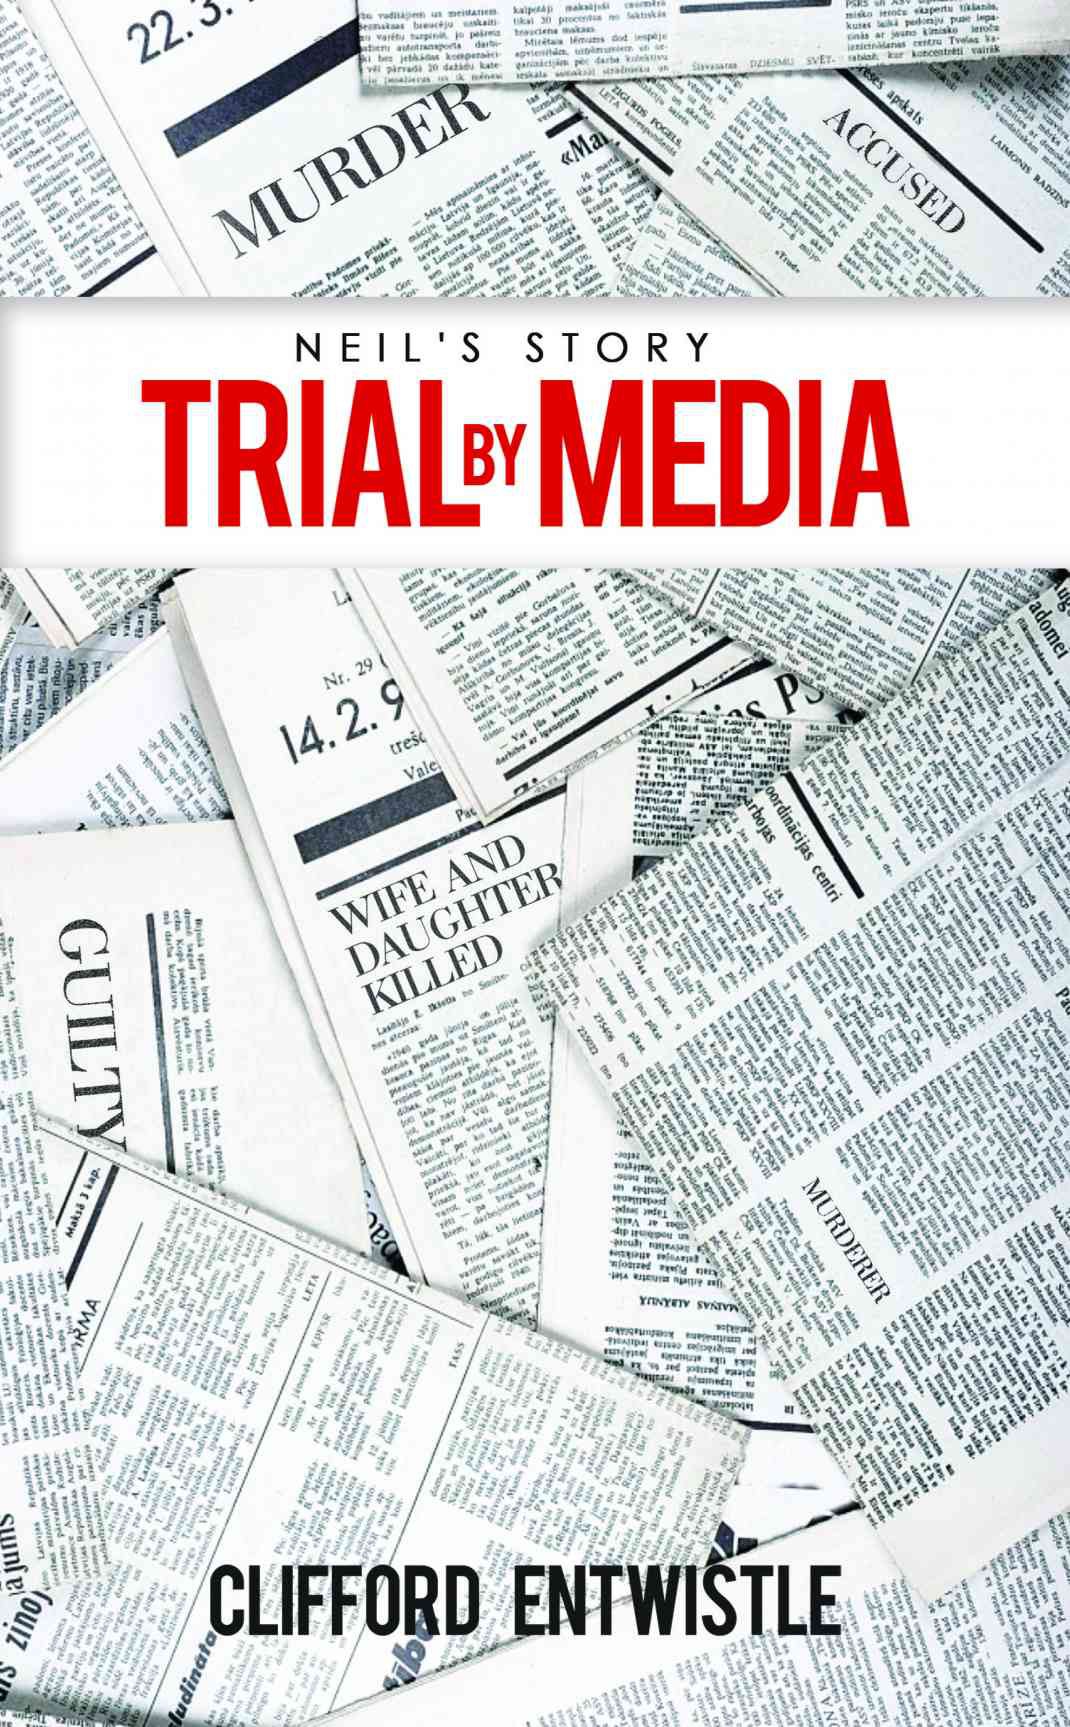 Author of ‘Neil's Story: Trial by Media’, Clifford Entwistle, Featured in an Online Newspaper